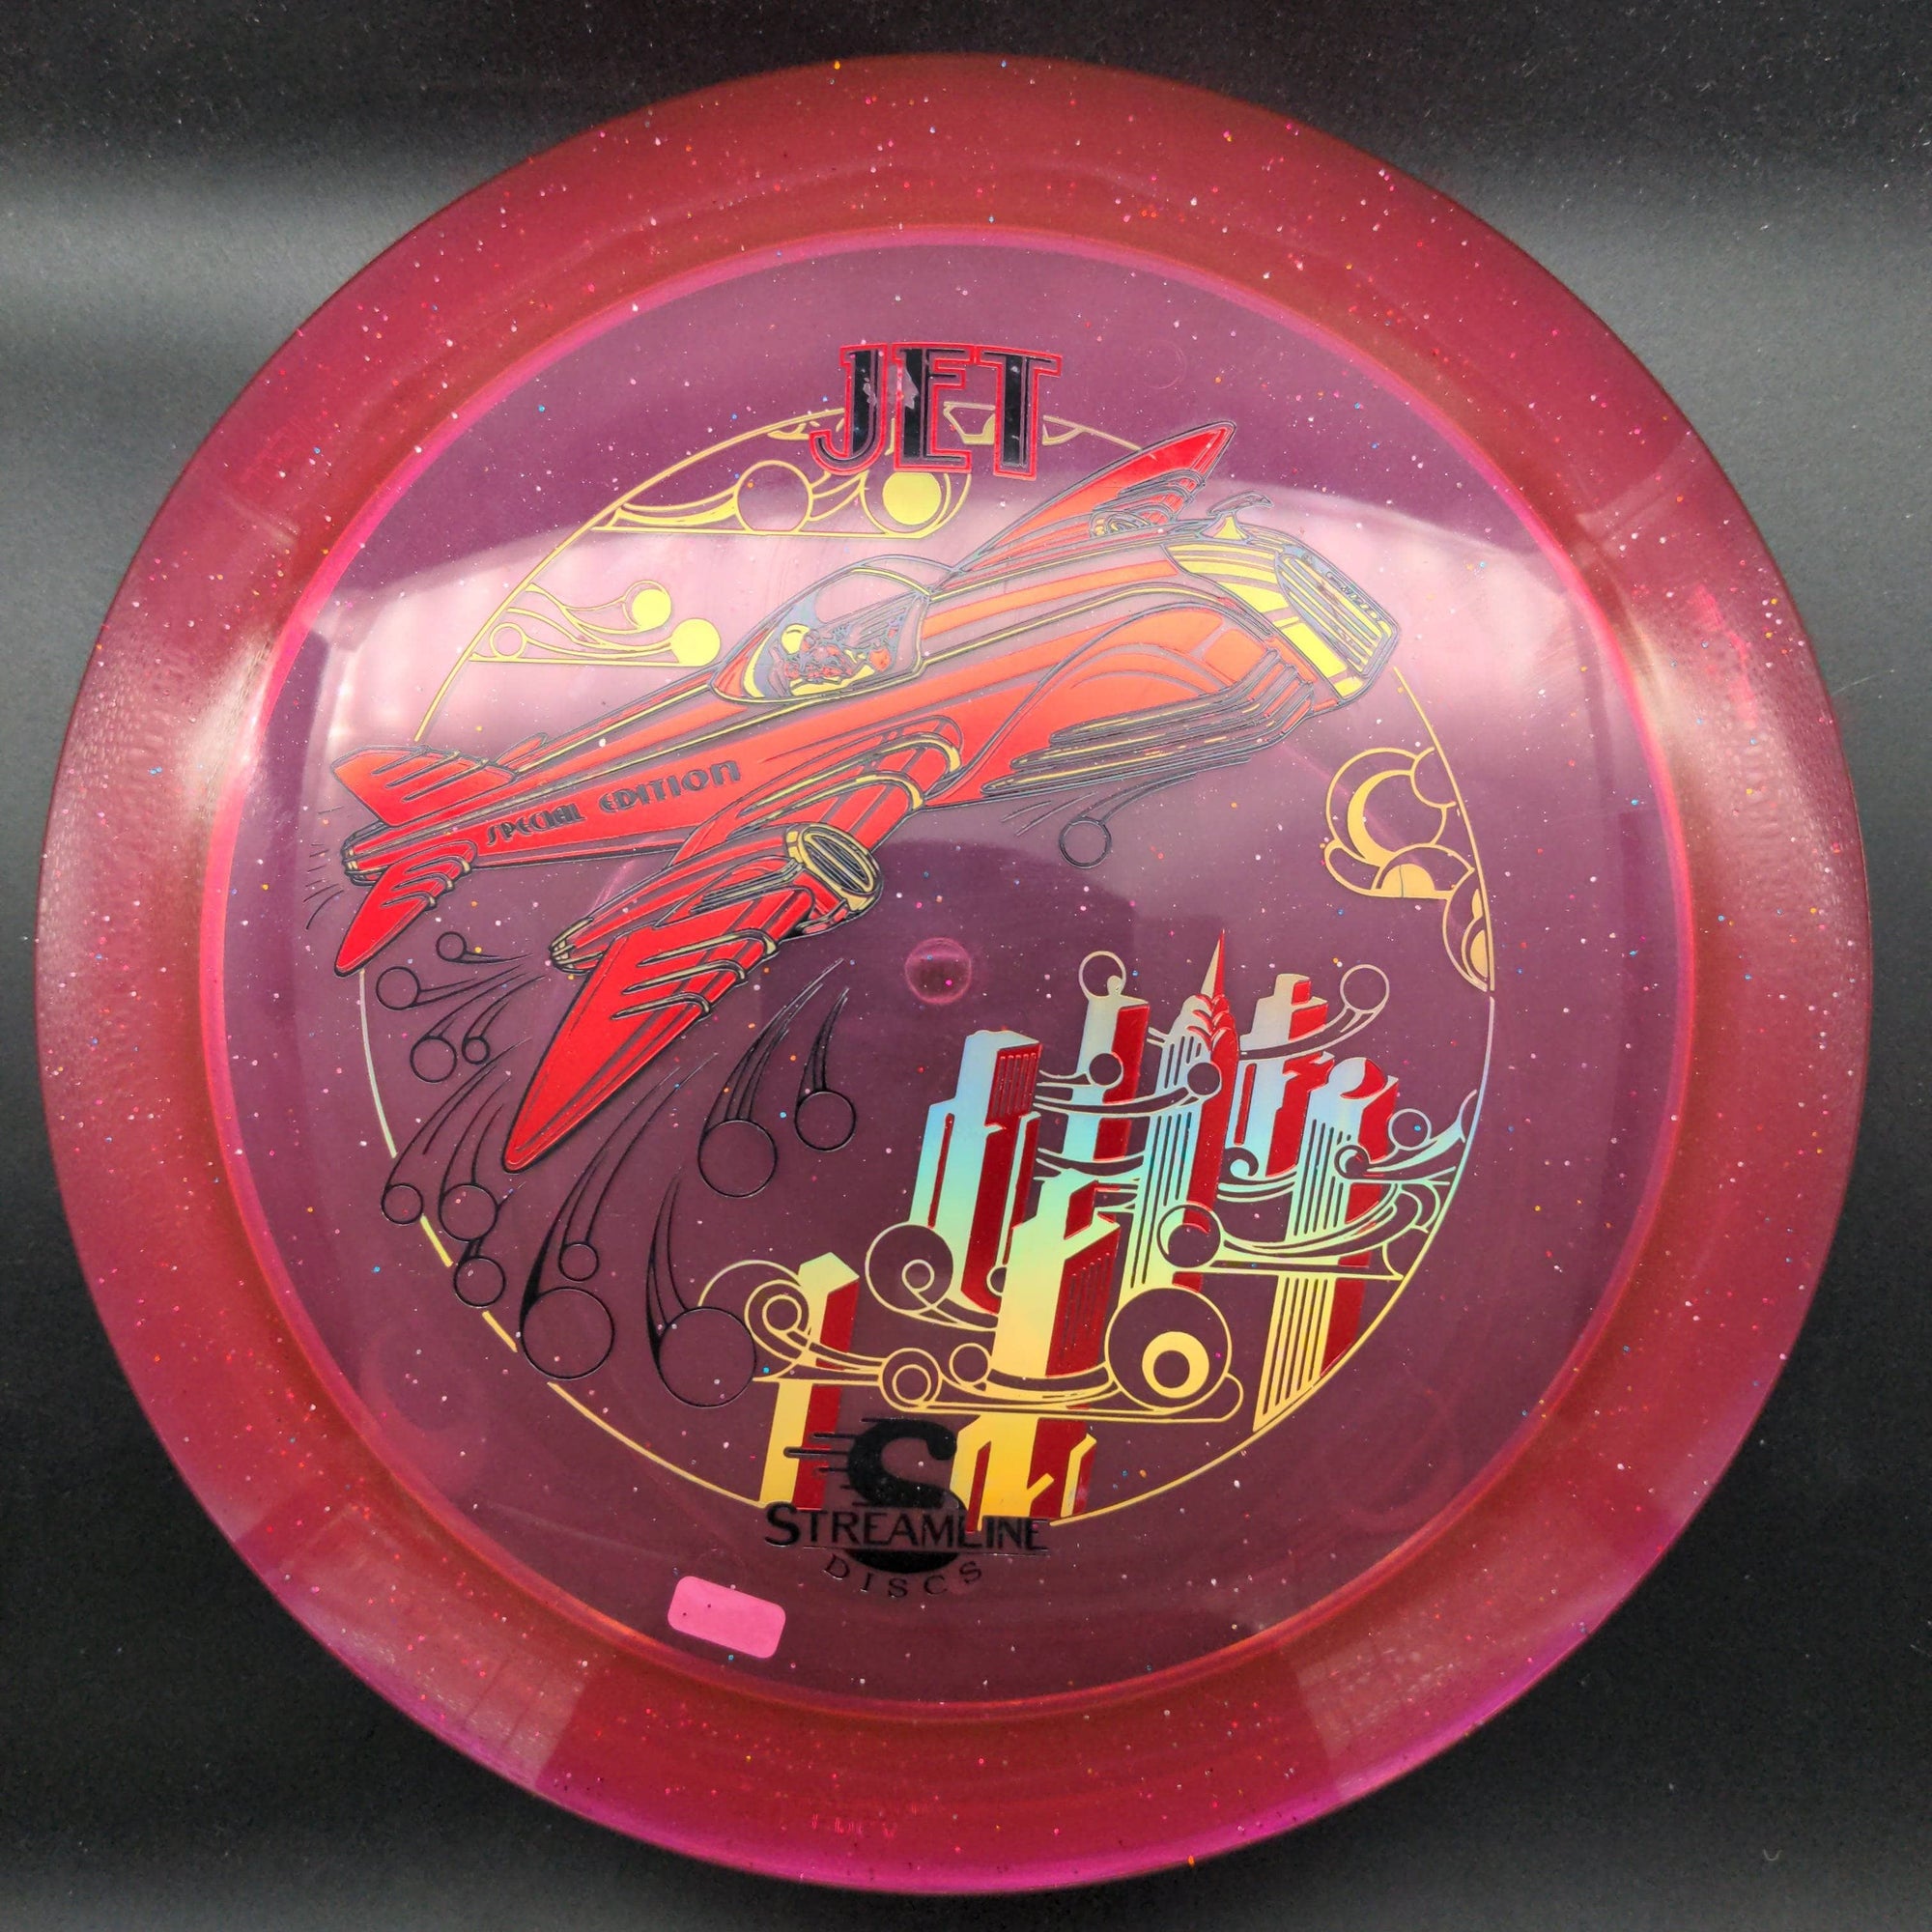 Streamline Distance Driver Red 175g Jet, Proton, Special Edition